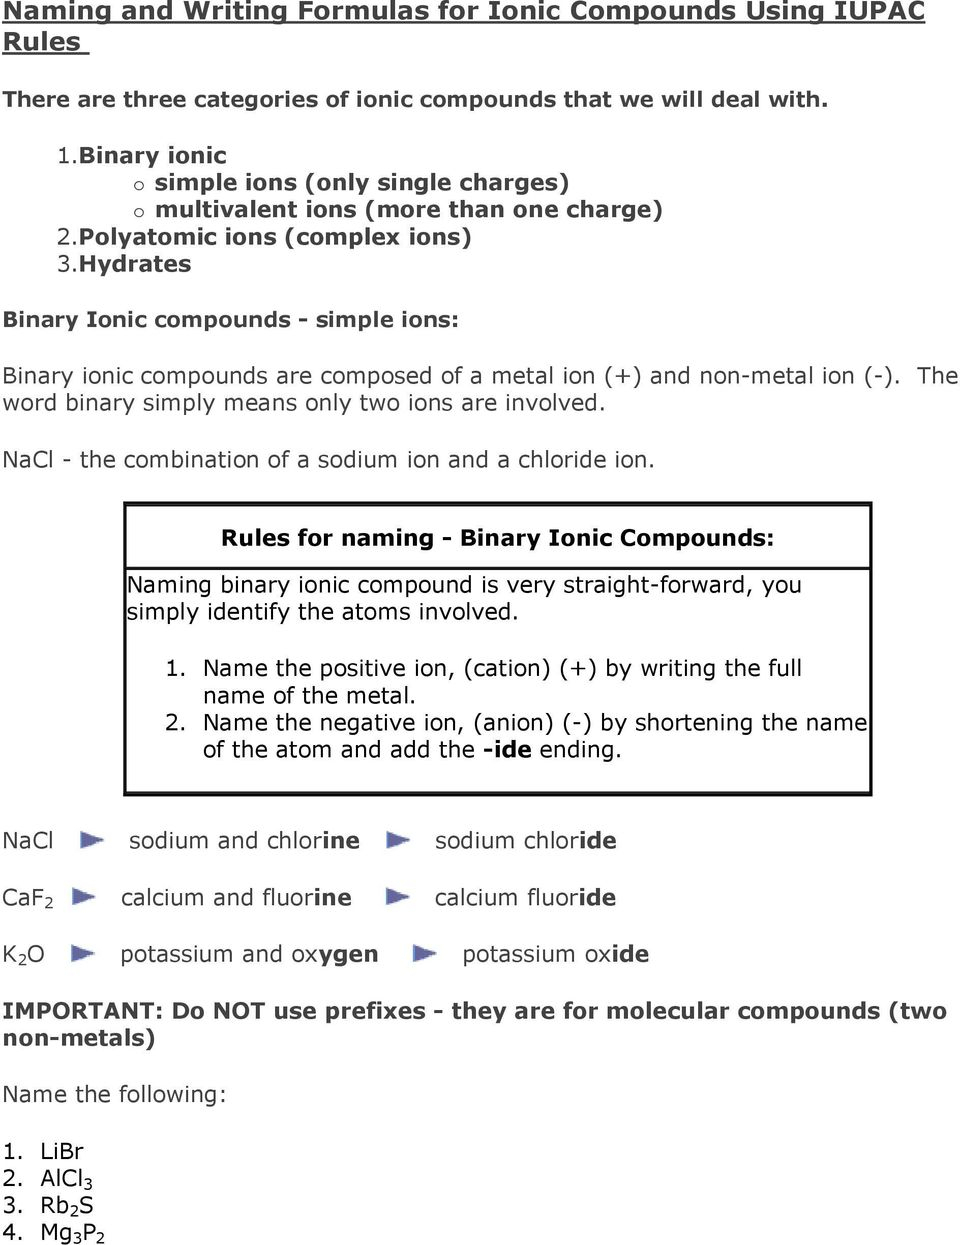 writing-formulas-for-ionic-compounds-worksheet-with-answers-db-excel